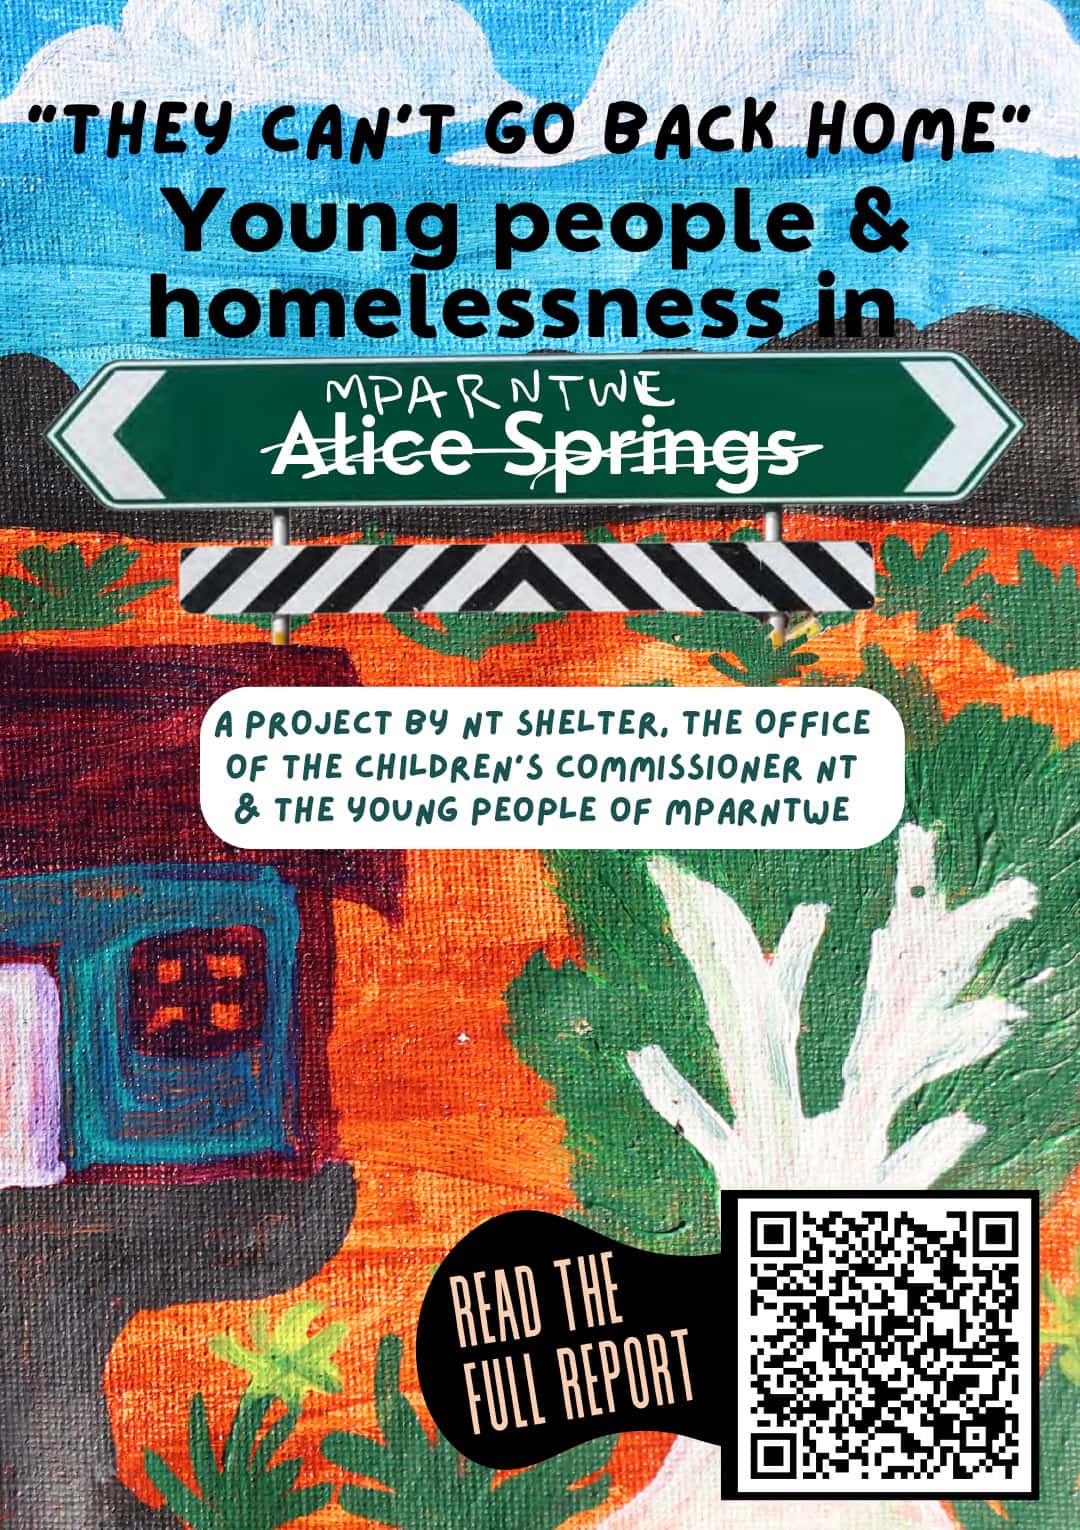 They can't go back home: Young people and homelessness in Mparntwe Alice Springs (Child Friendly)